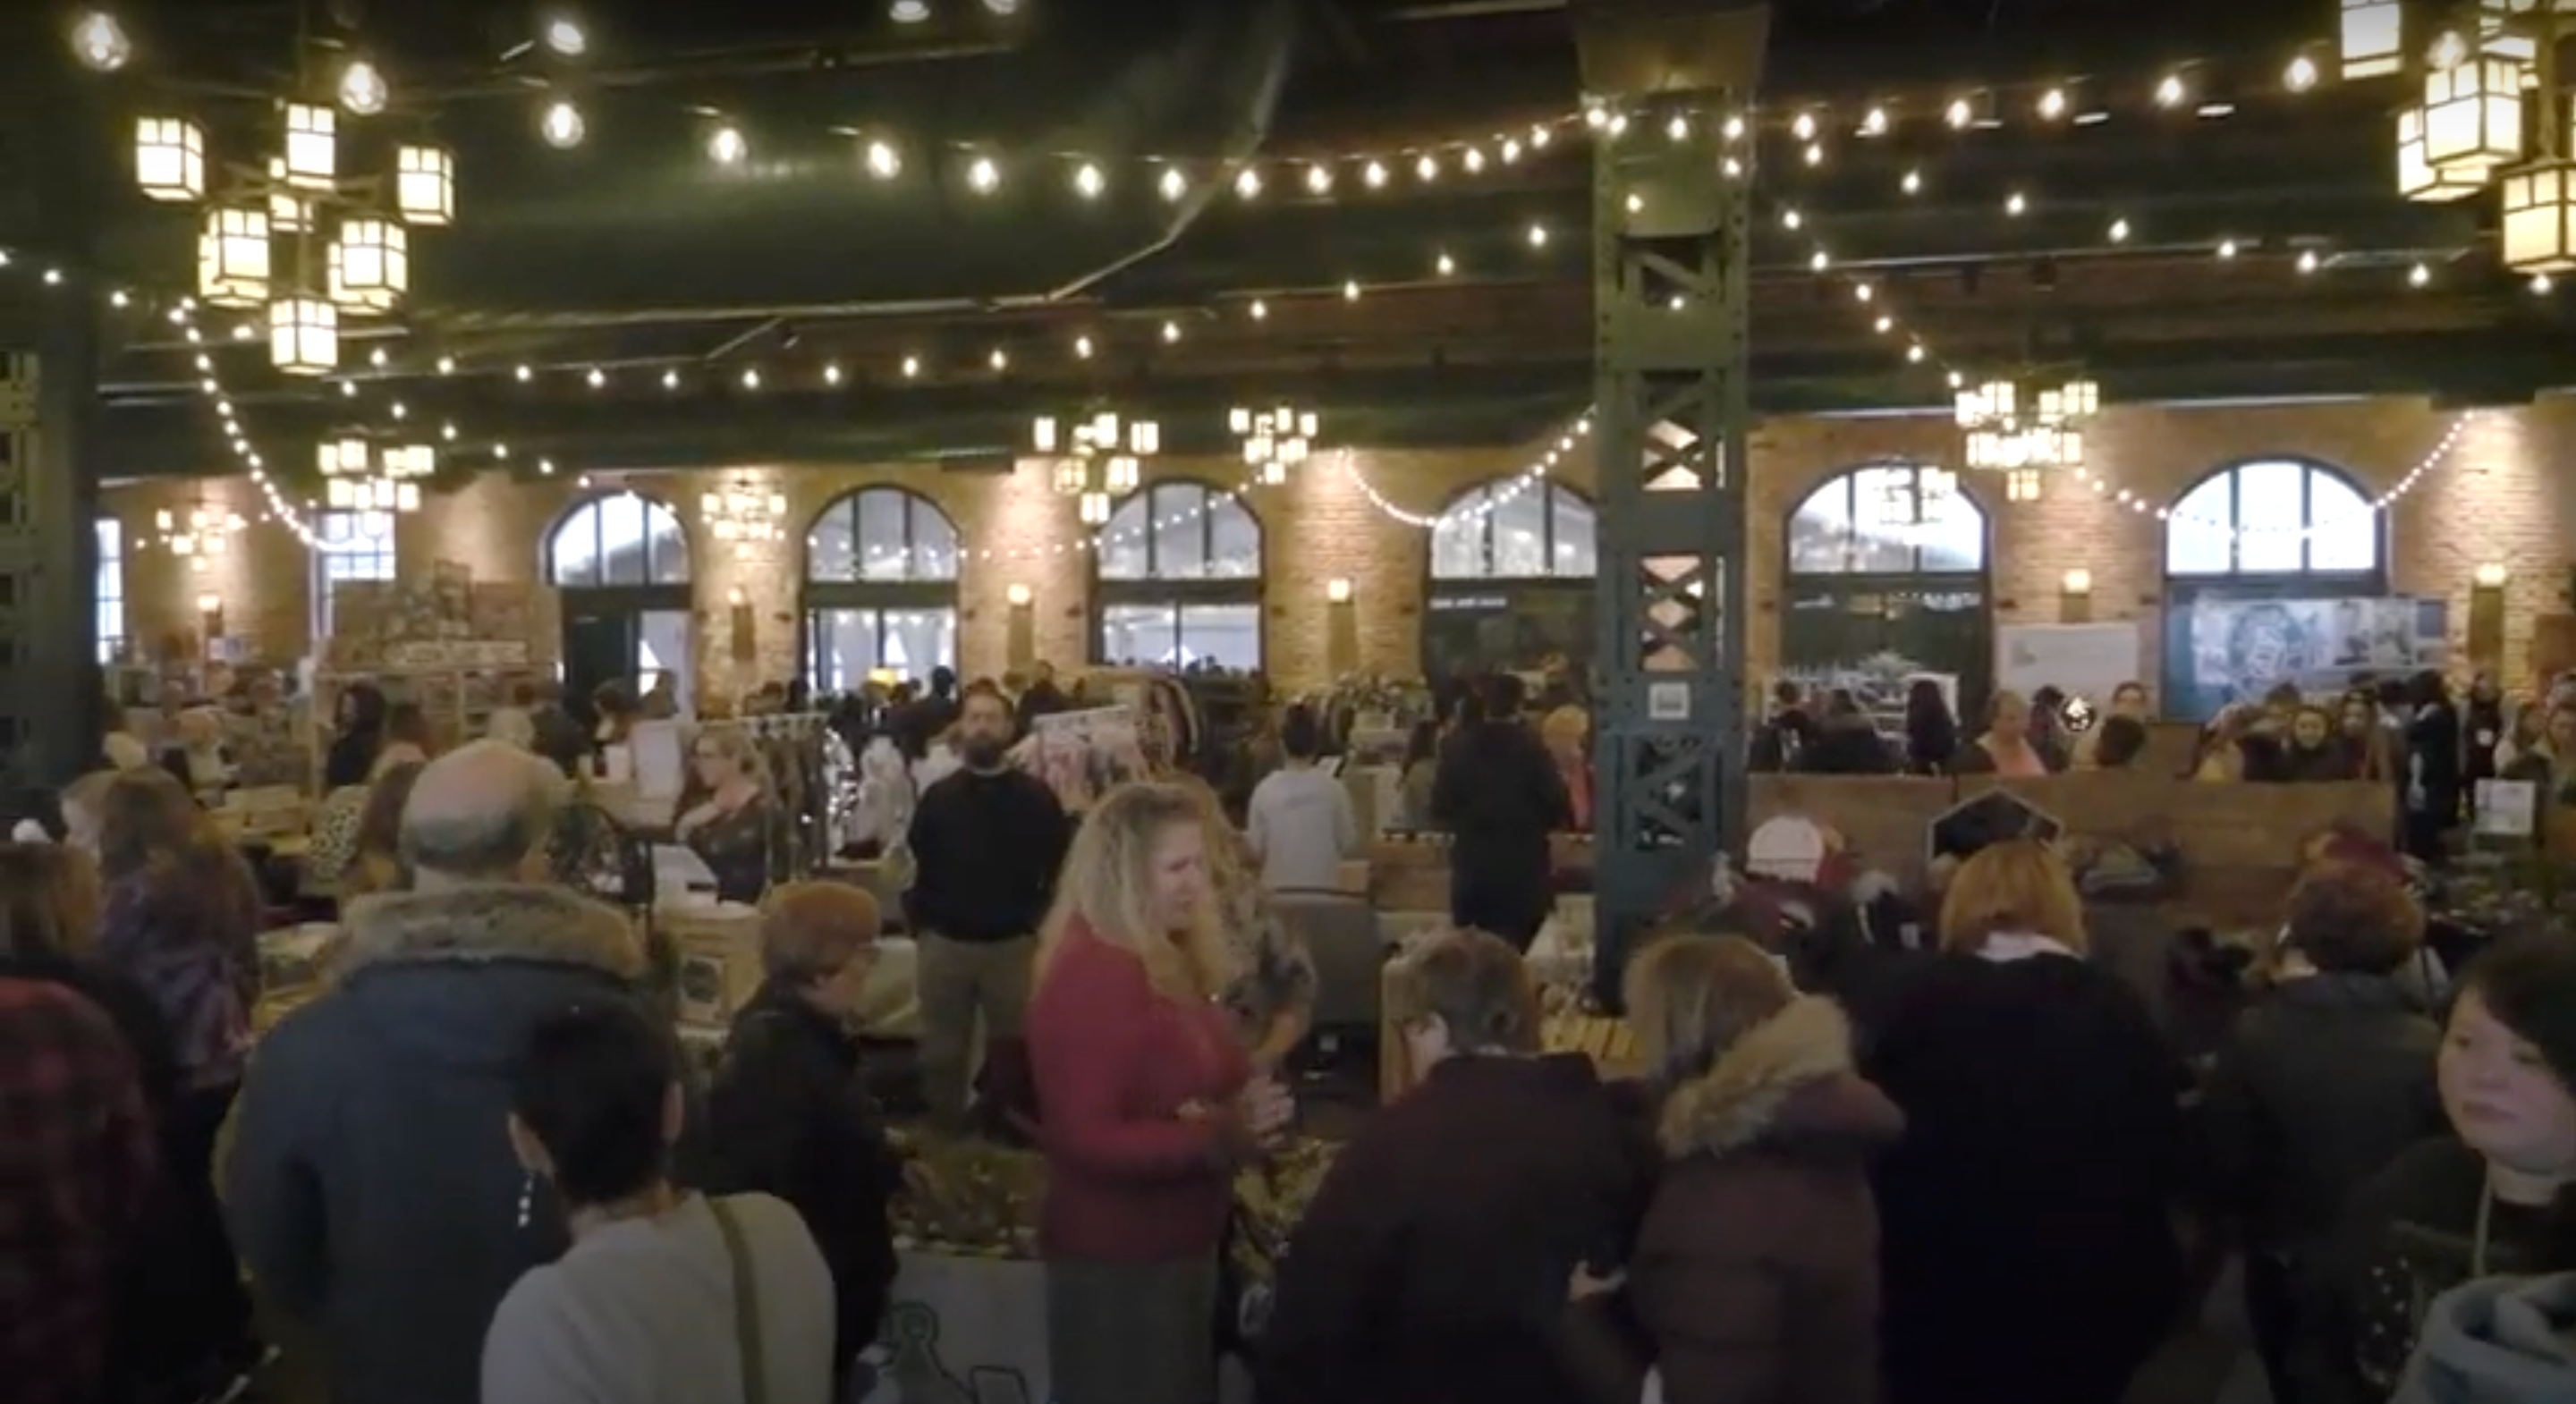 Load video: MN Christmas Market Video